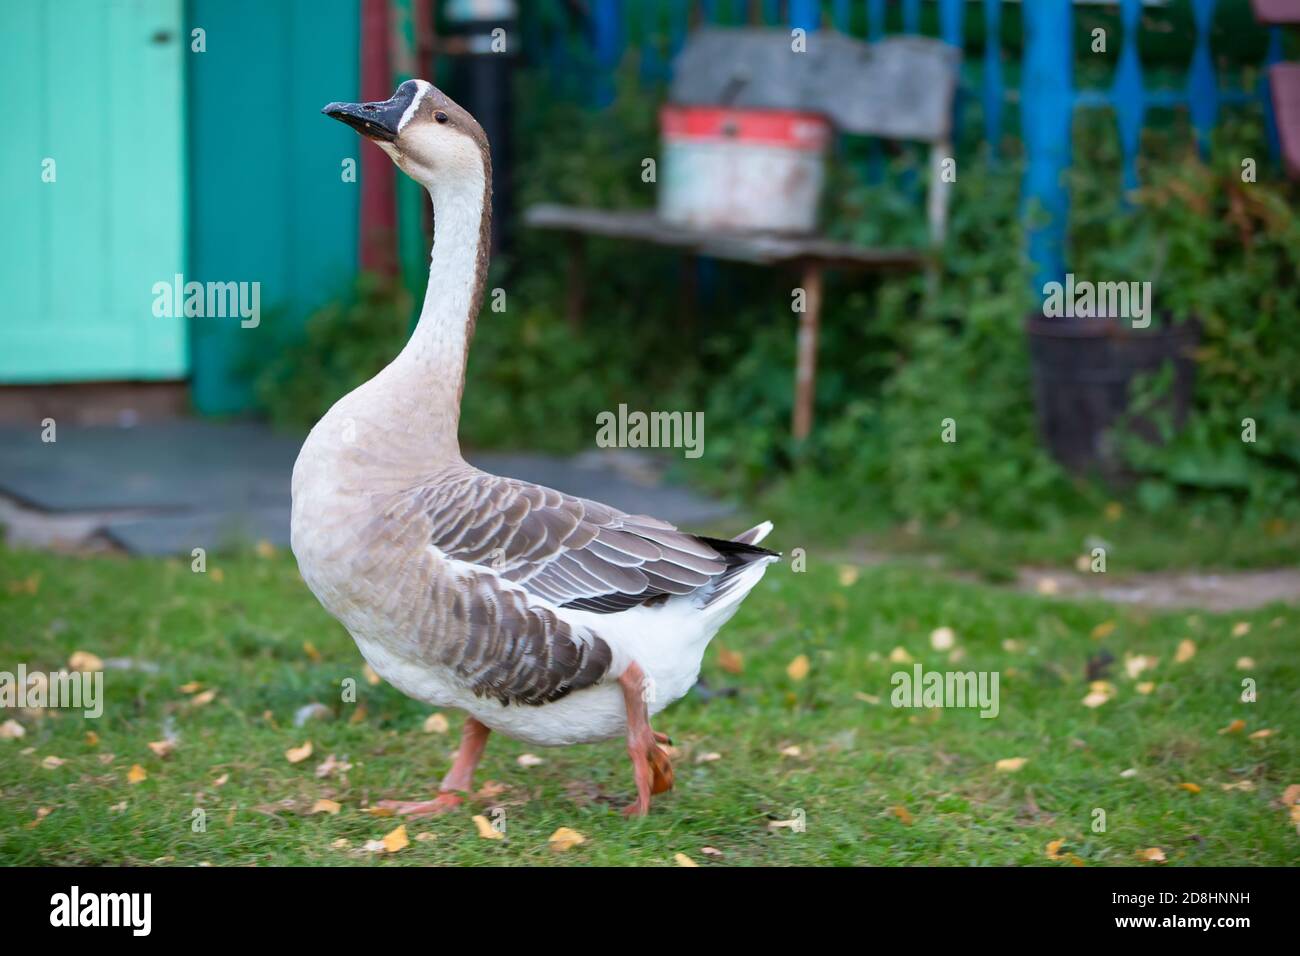 A beautiful domestic goose walks on the green grass. Stock Photo